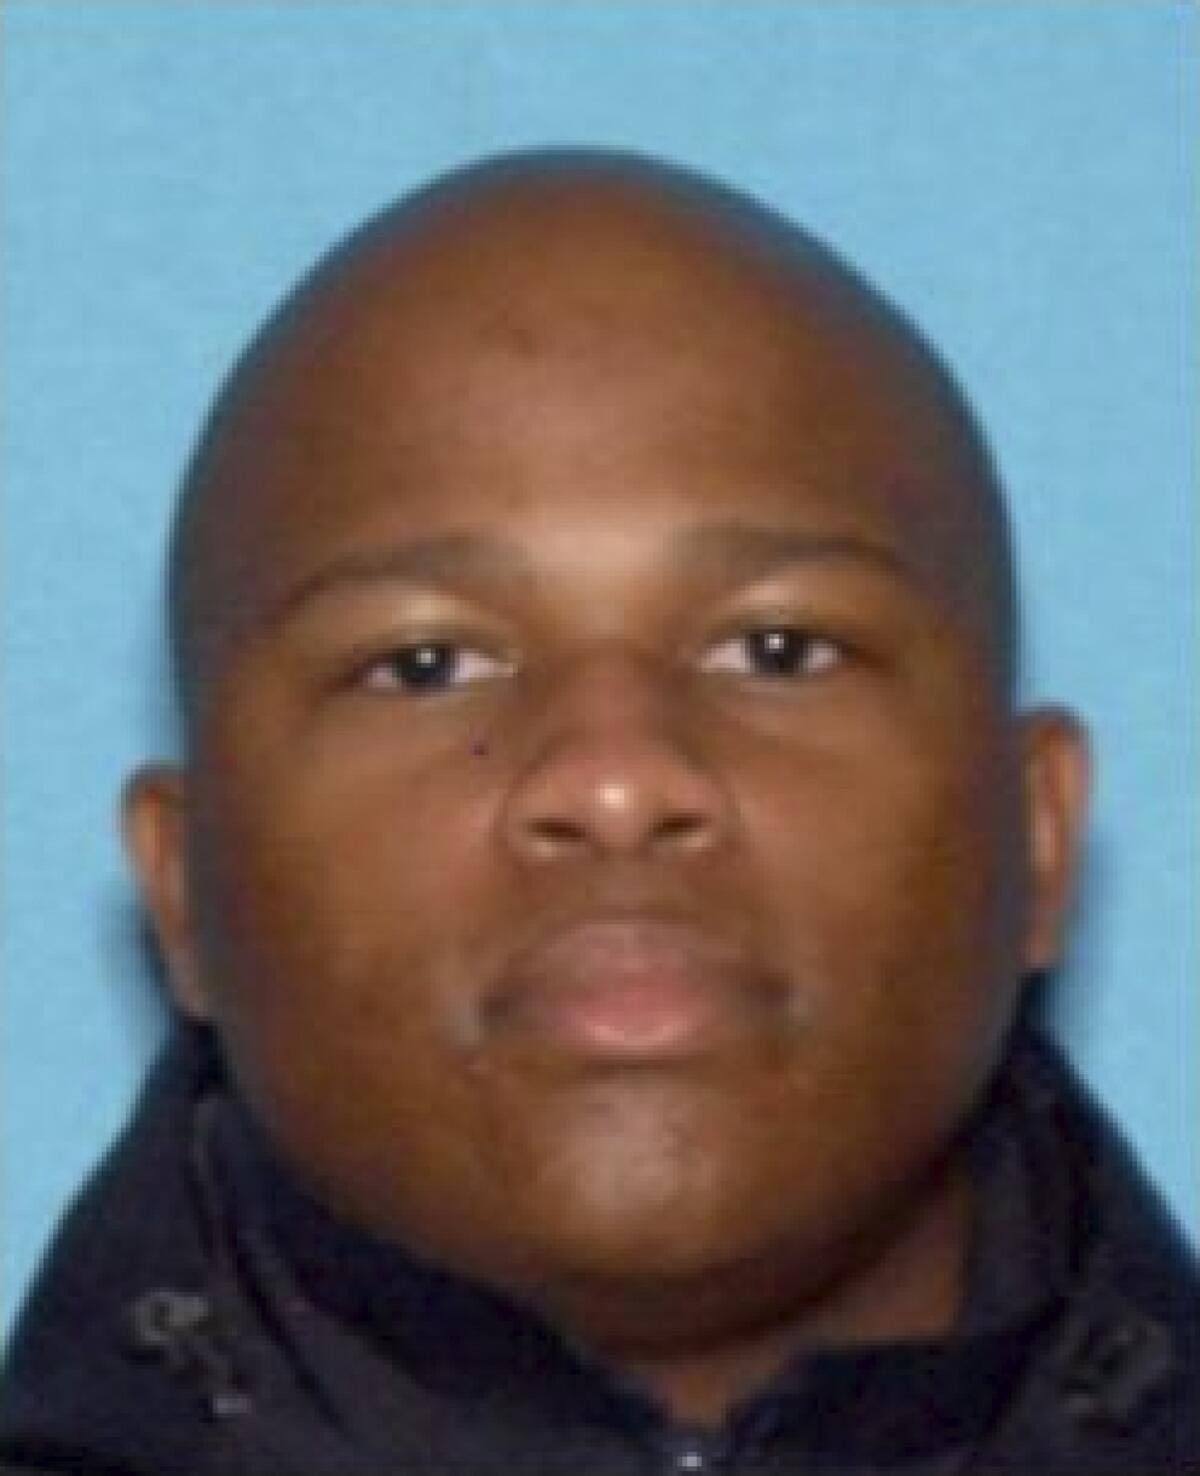 FILE - This undated photo provided by the Alameda County Sheriff's Office shows Devin Williams Jr. Williams, a Northern California sheriff's deputy, was charged Friday, Sept. 9, 2022, in the killings of a husband and wife who were shot inside their home, prosecutors said. (Alameda County Sheriff's Office via AP, File)